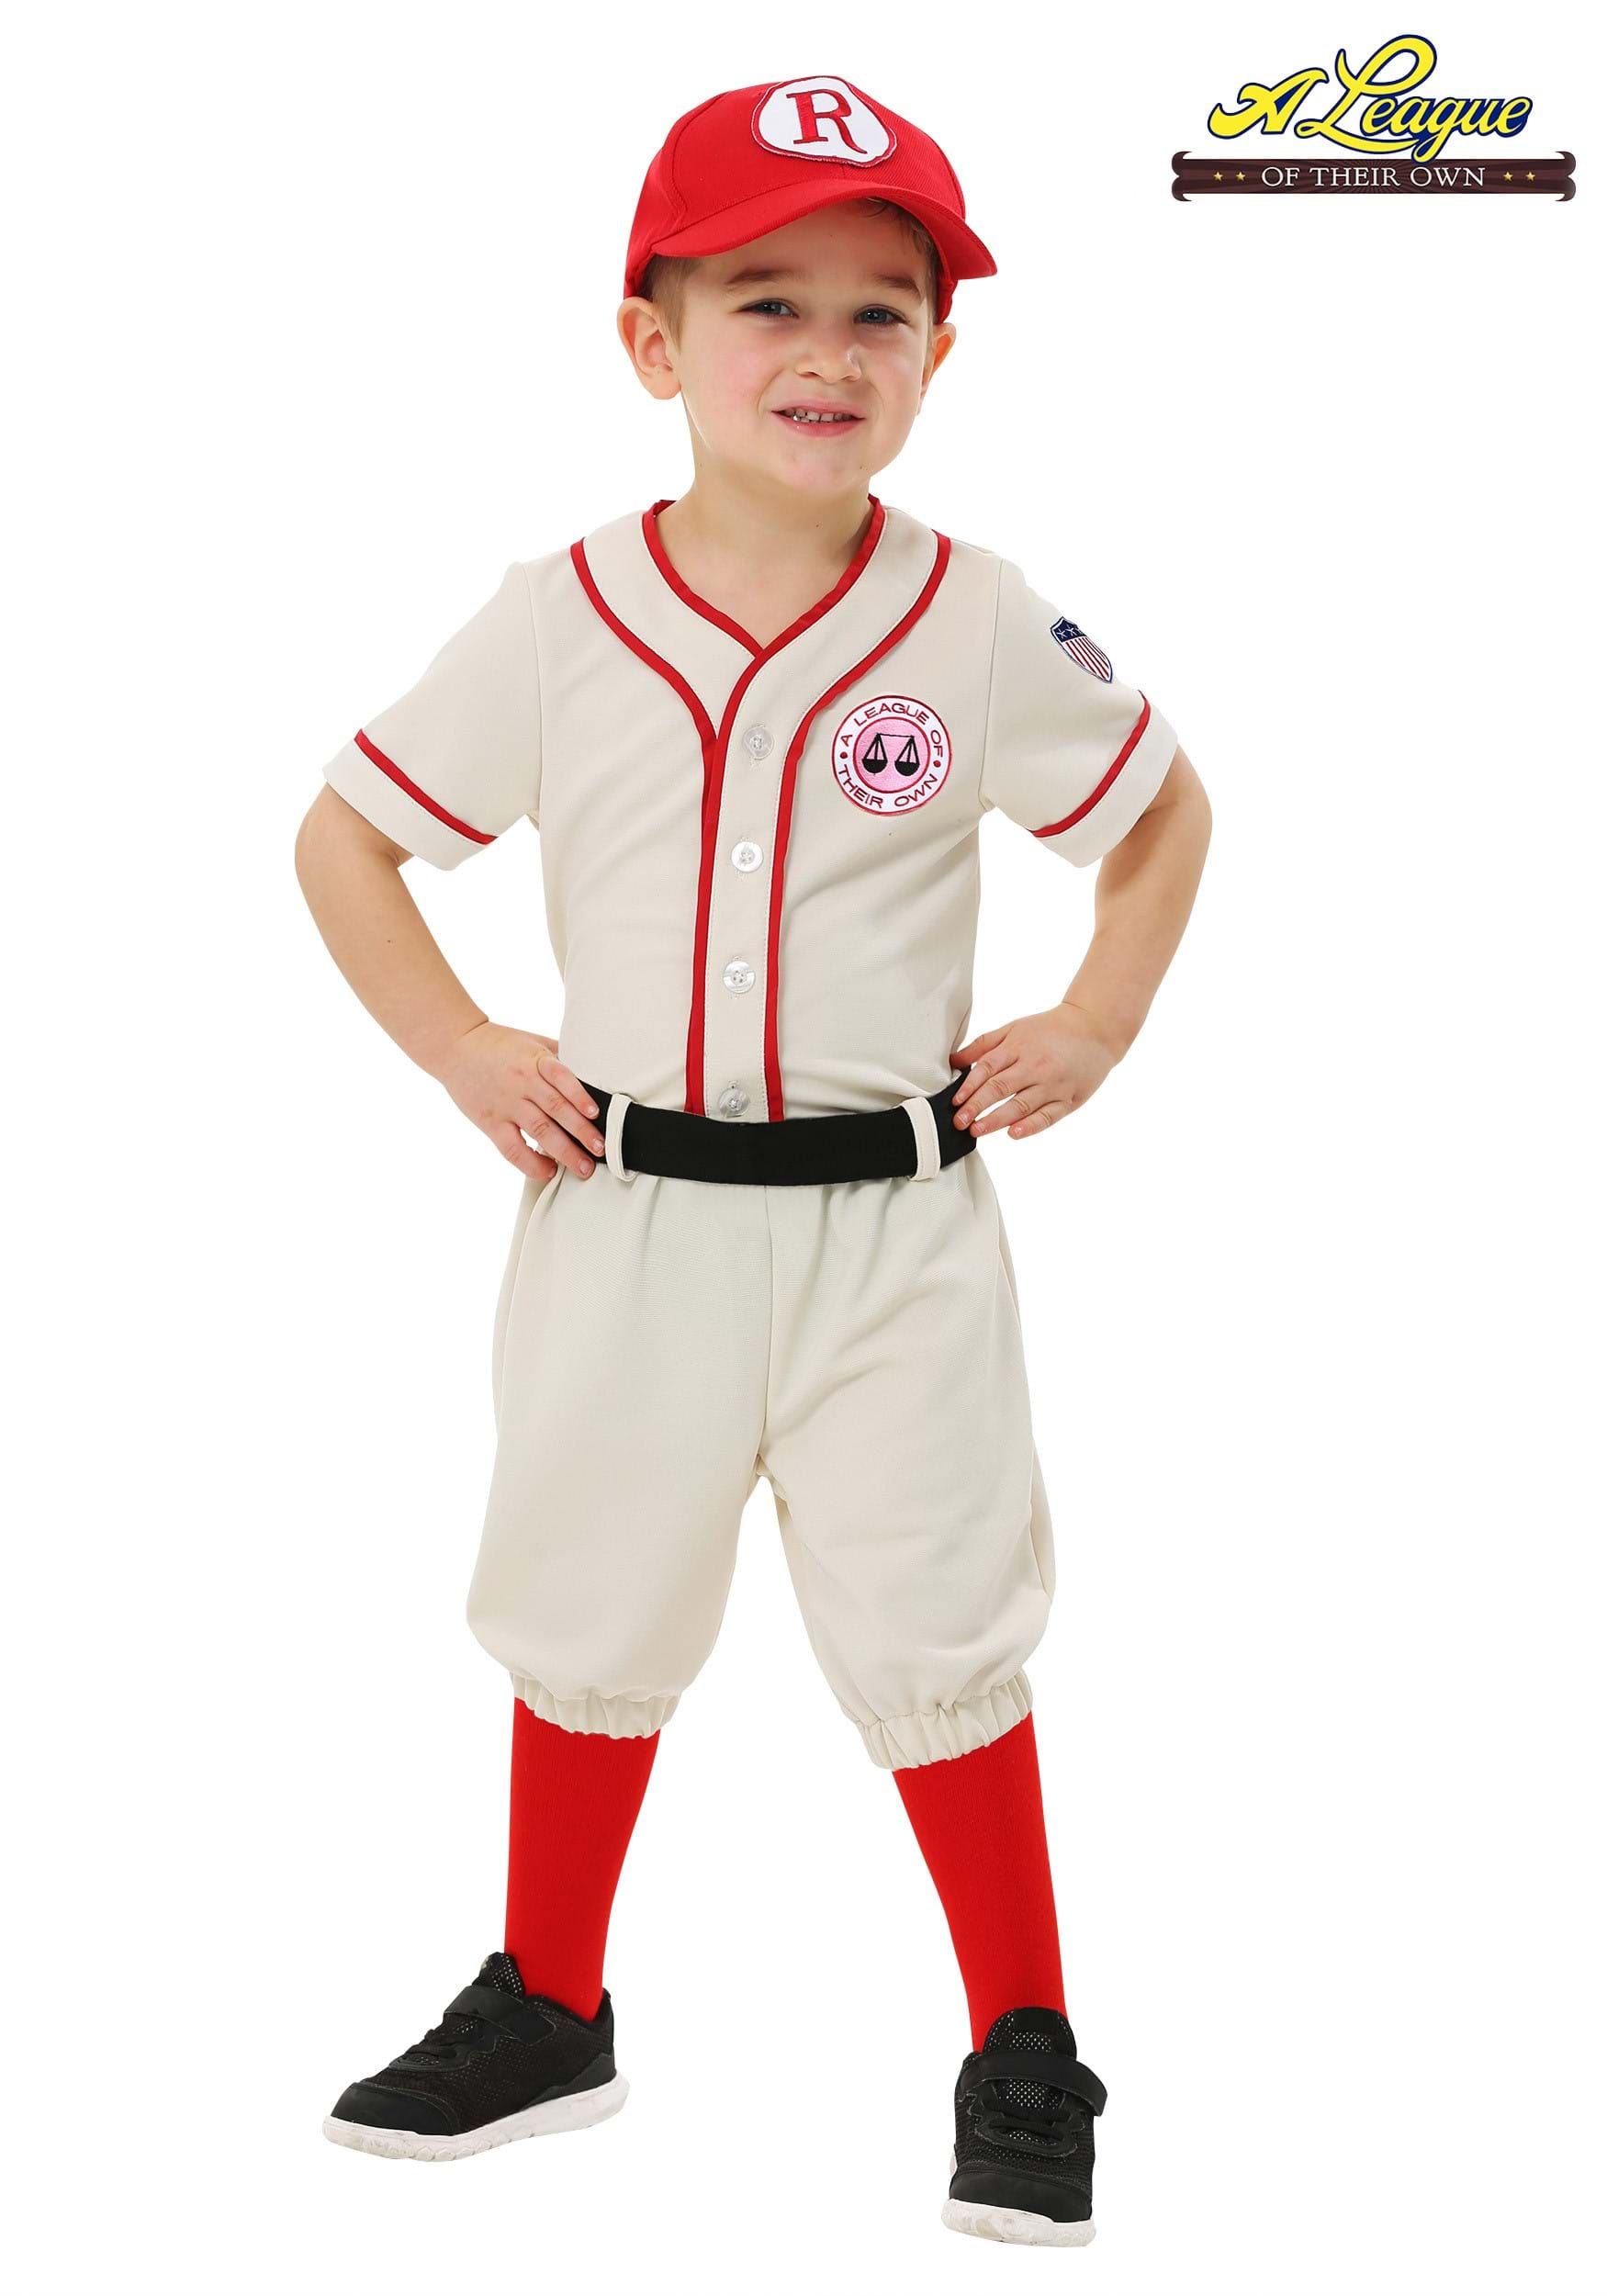 A League Of Their Own Jimmy Toddler Costume